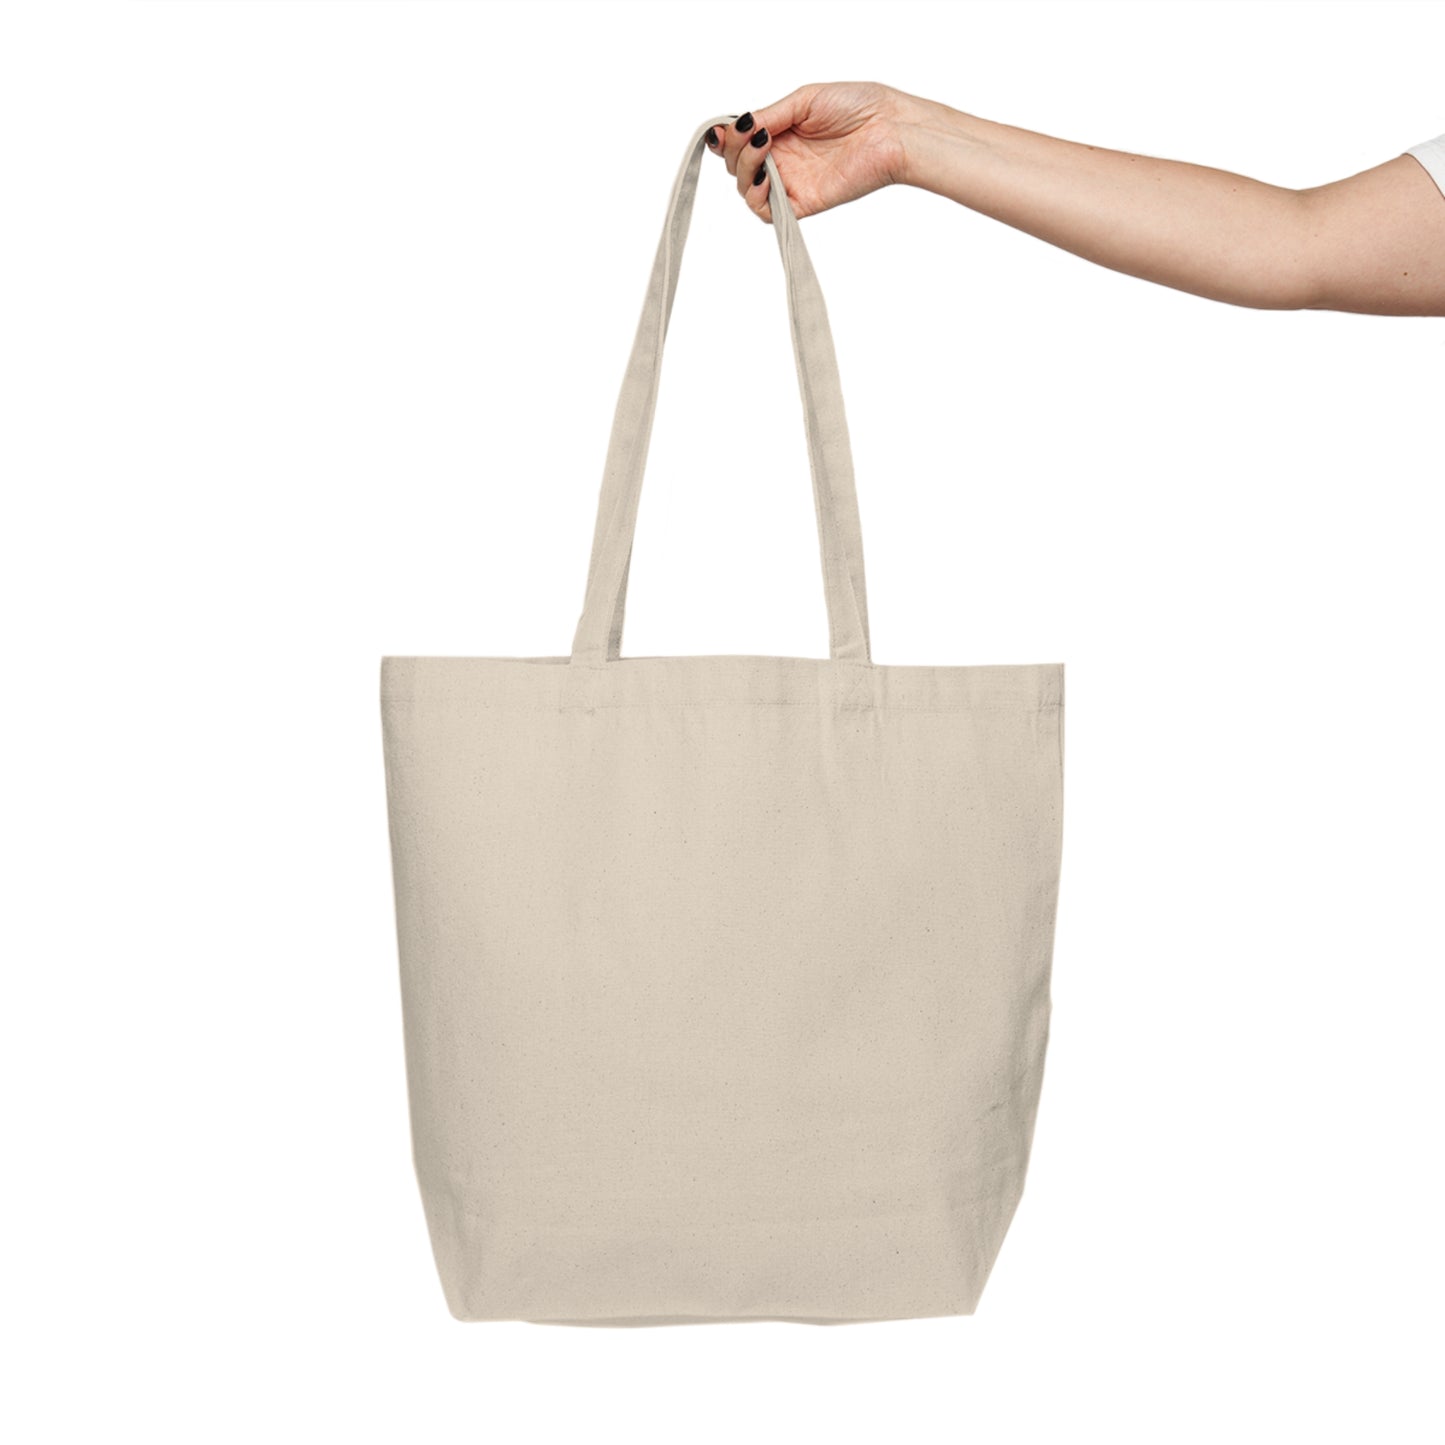 Y'all Means All - Canvas Shopping Tote